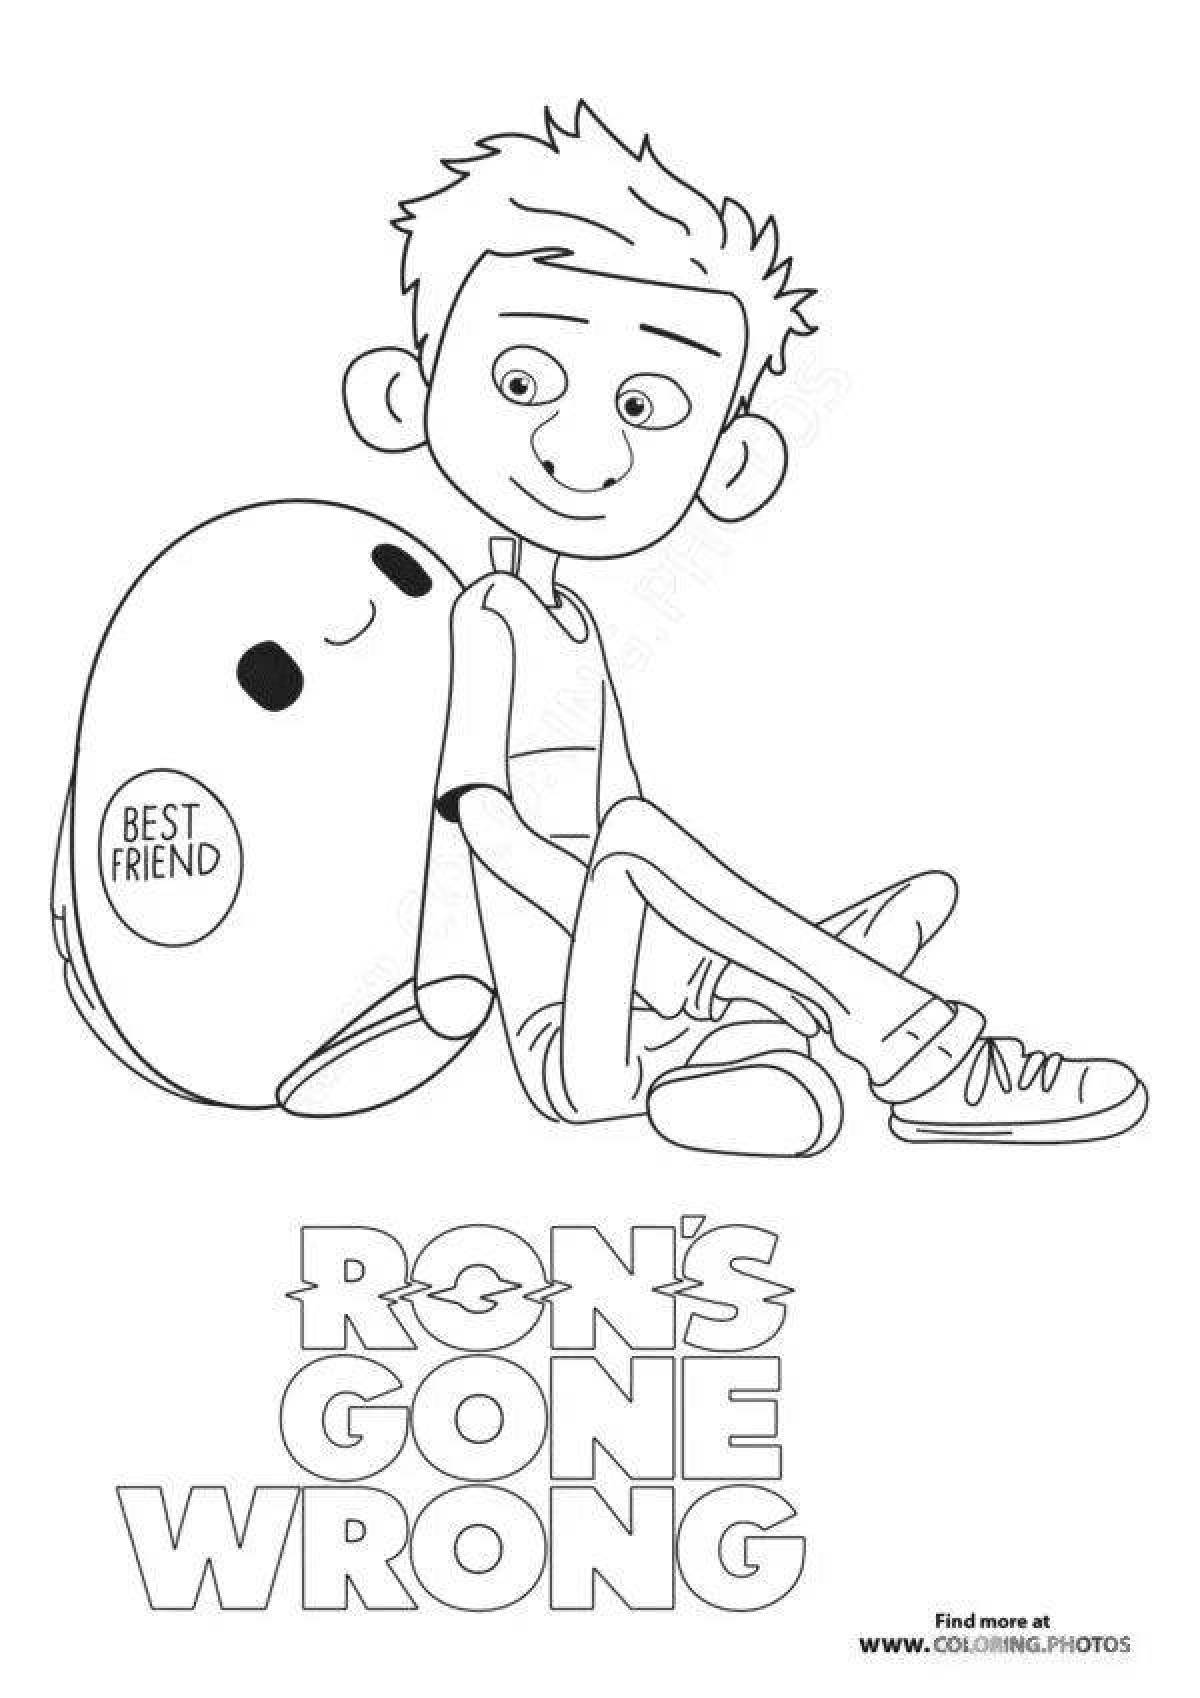 Color mesmerized ron coloring page